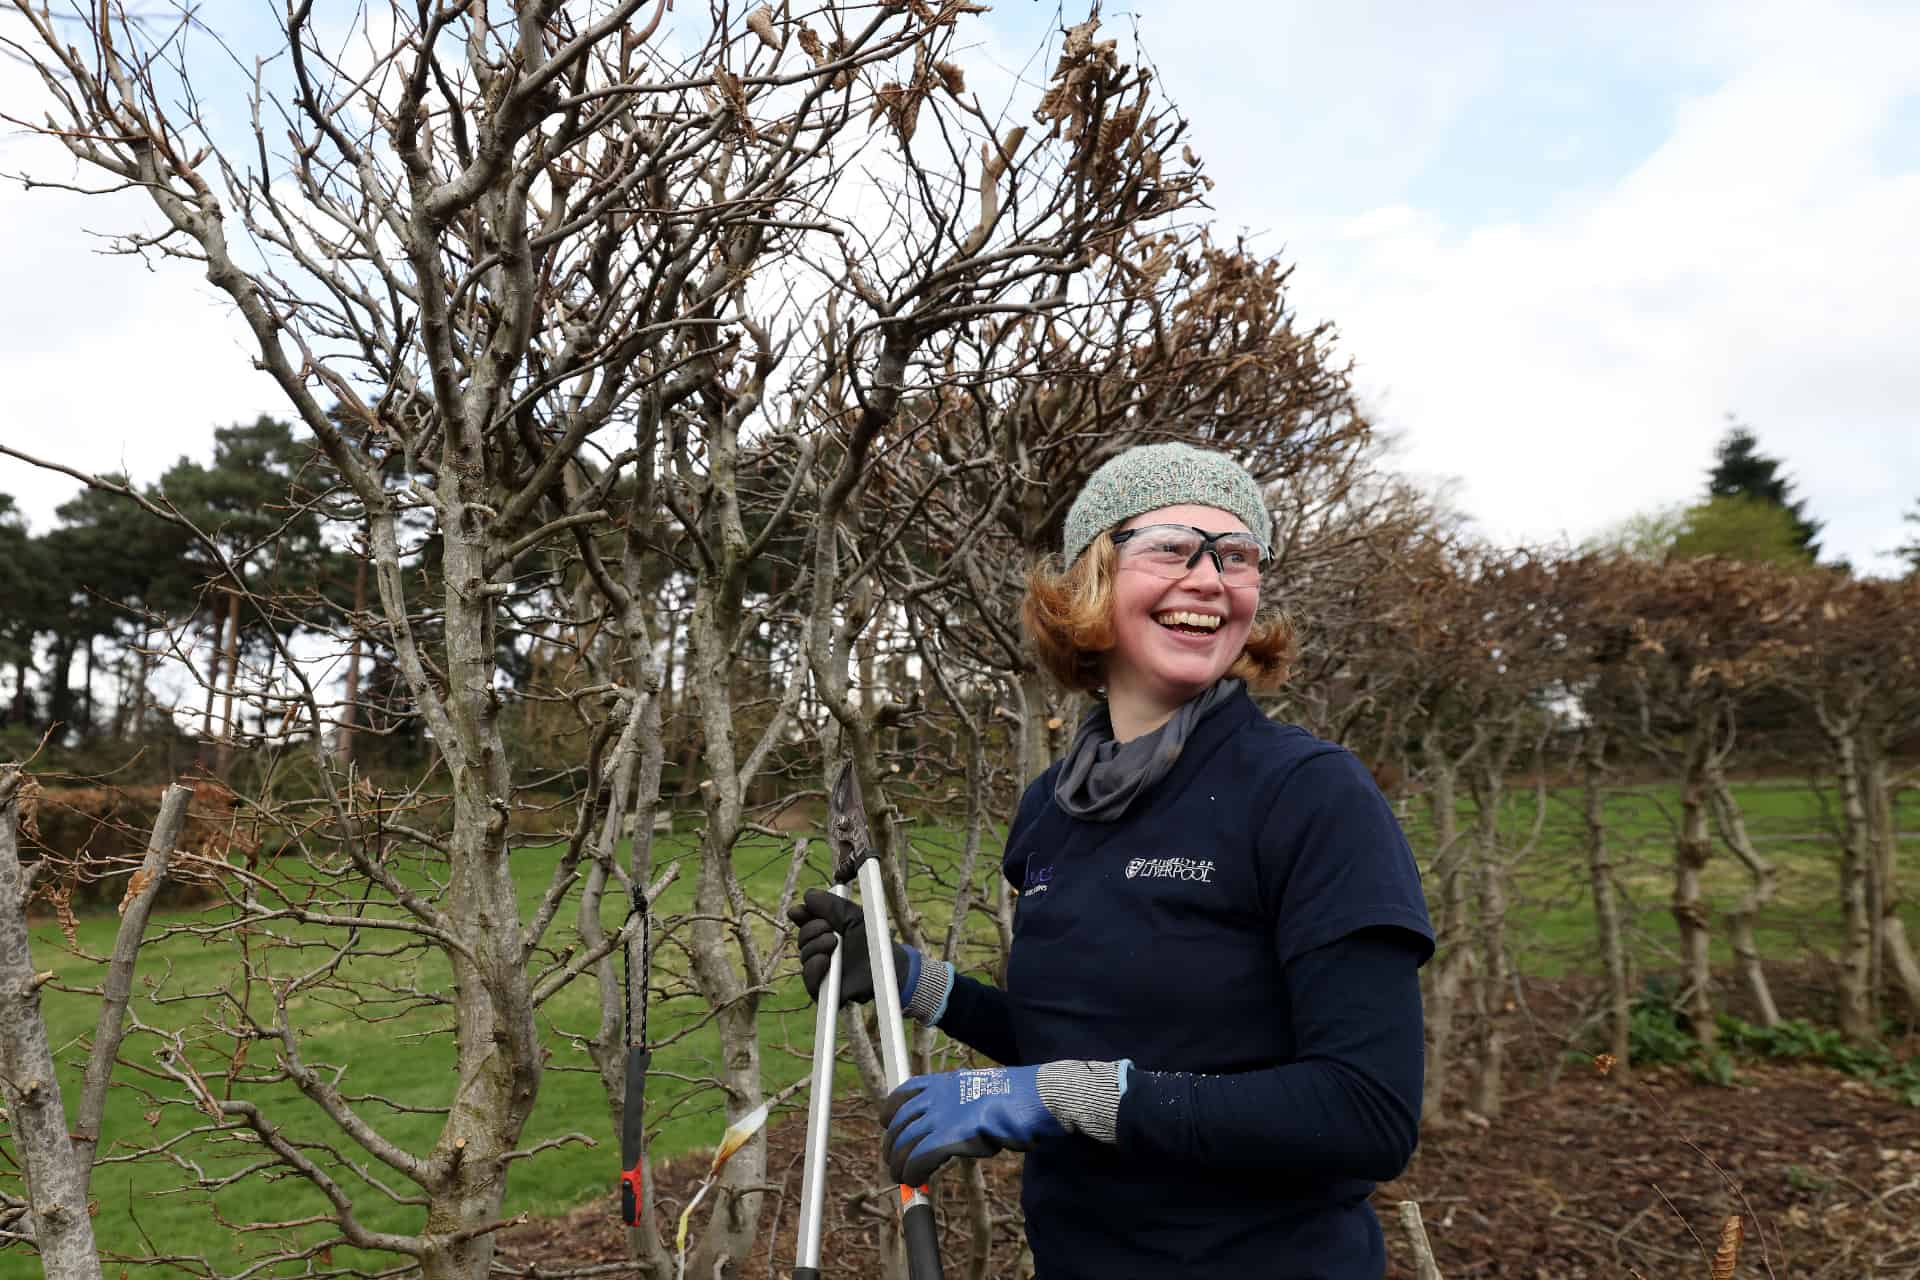 A young woman pruning trees at Ness Gardens.